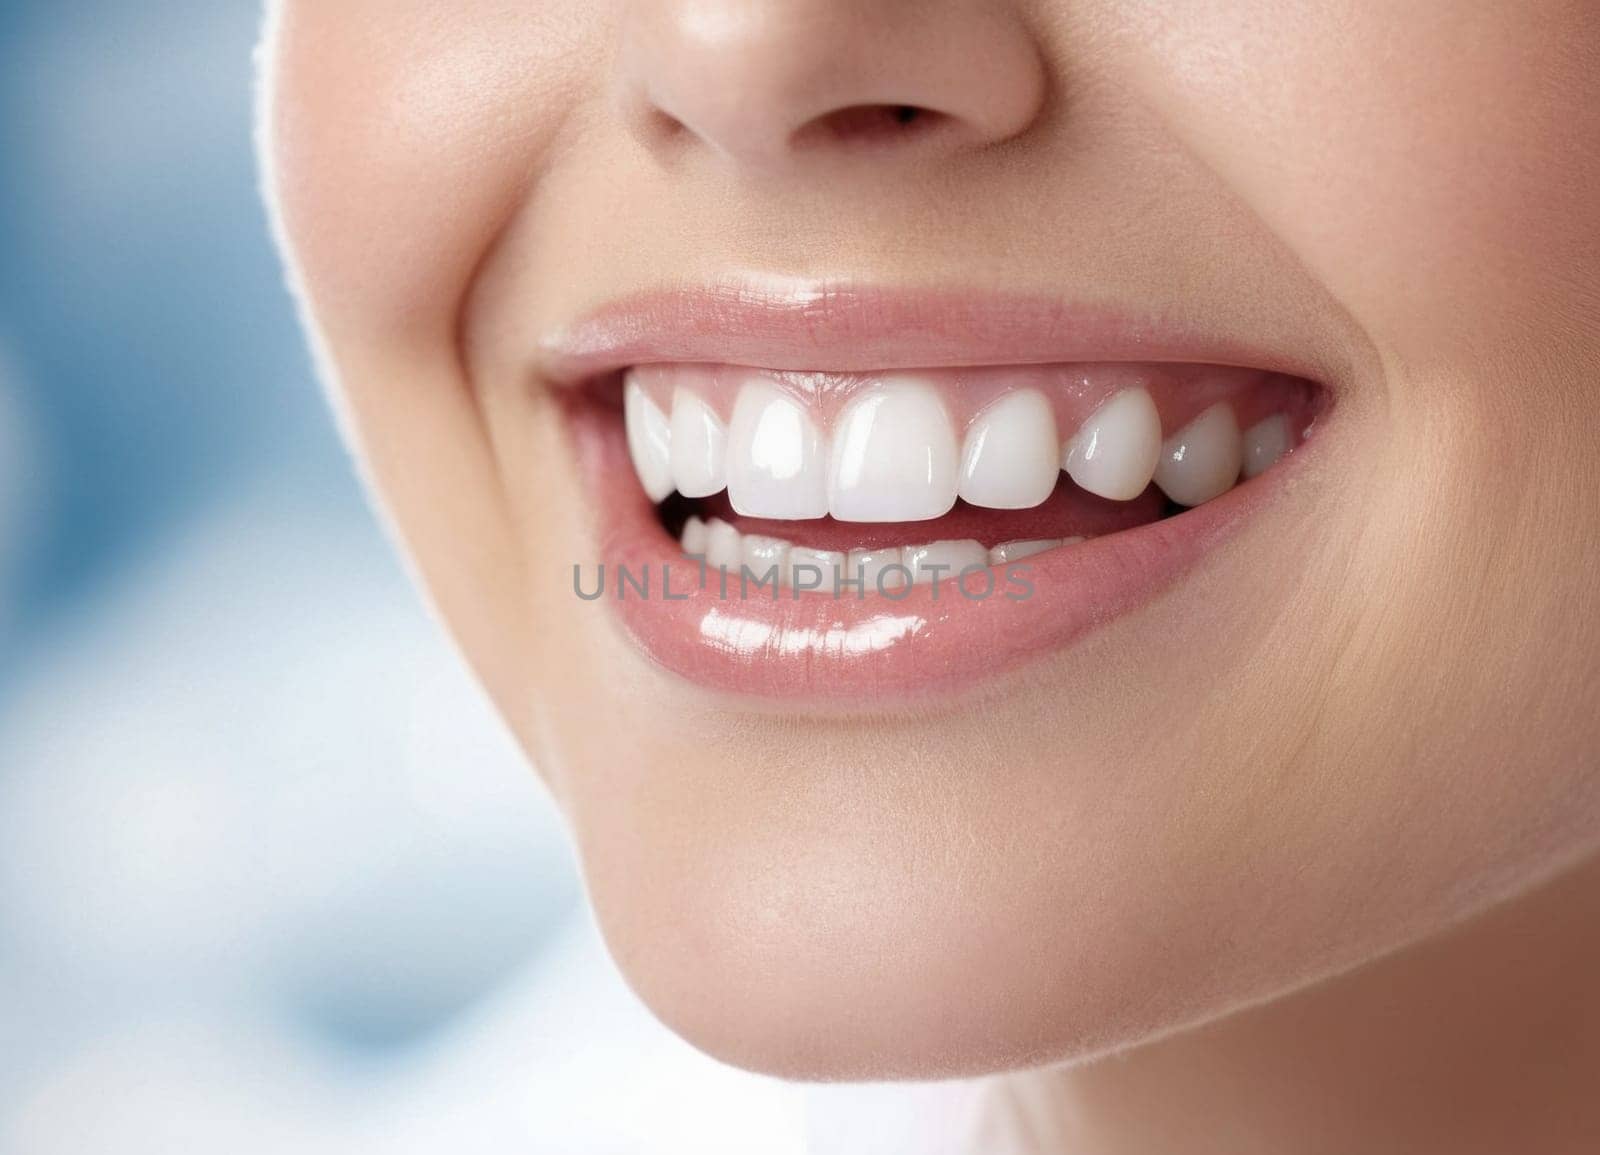 A close-up image capturing a radiant and confident smile. The individual s teeth are perfectly white and well-aligned showcasing optimal oral health and beauty. Ideal for dental care and beauty promotions.